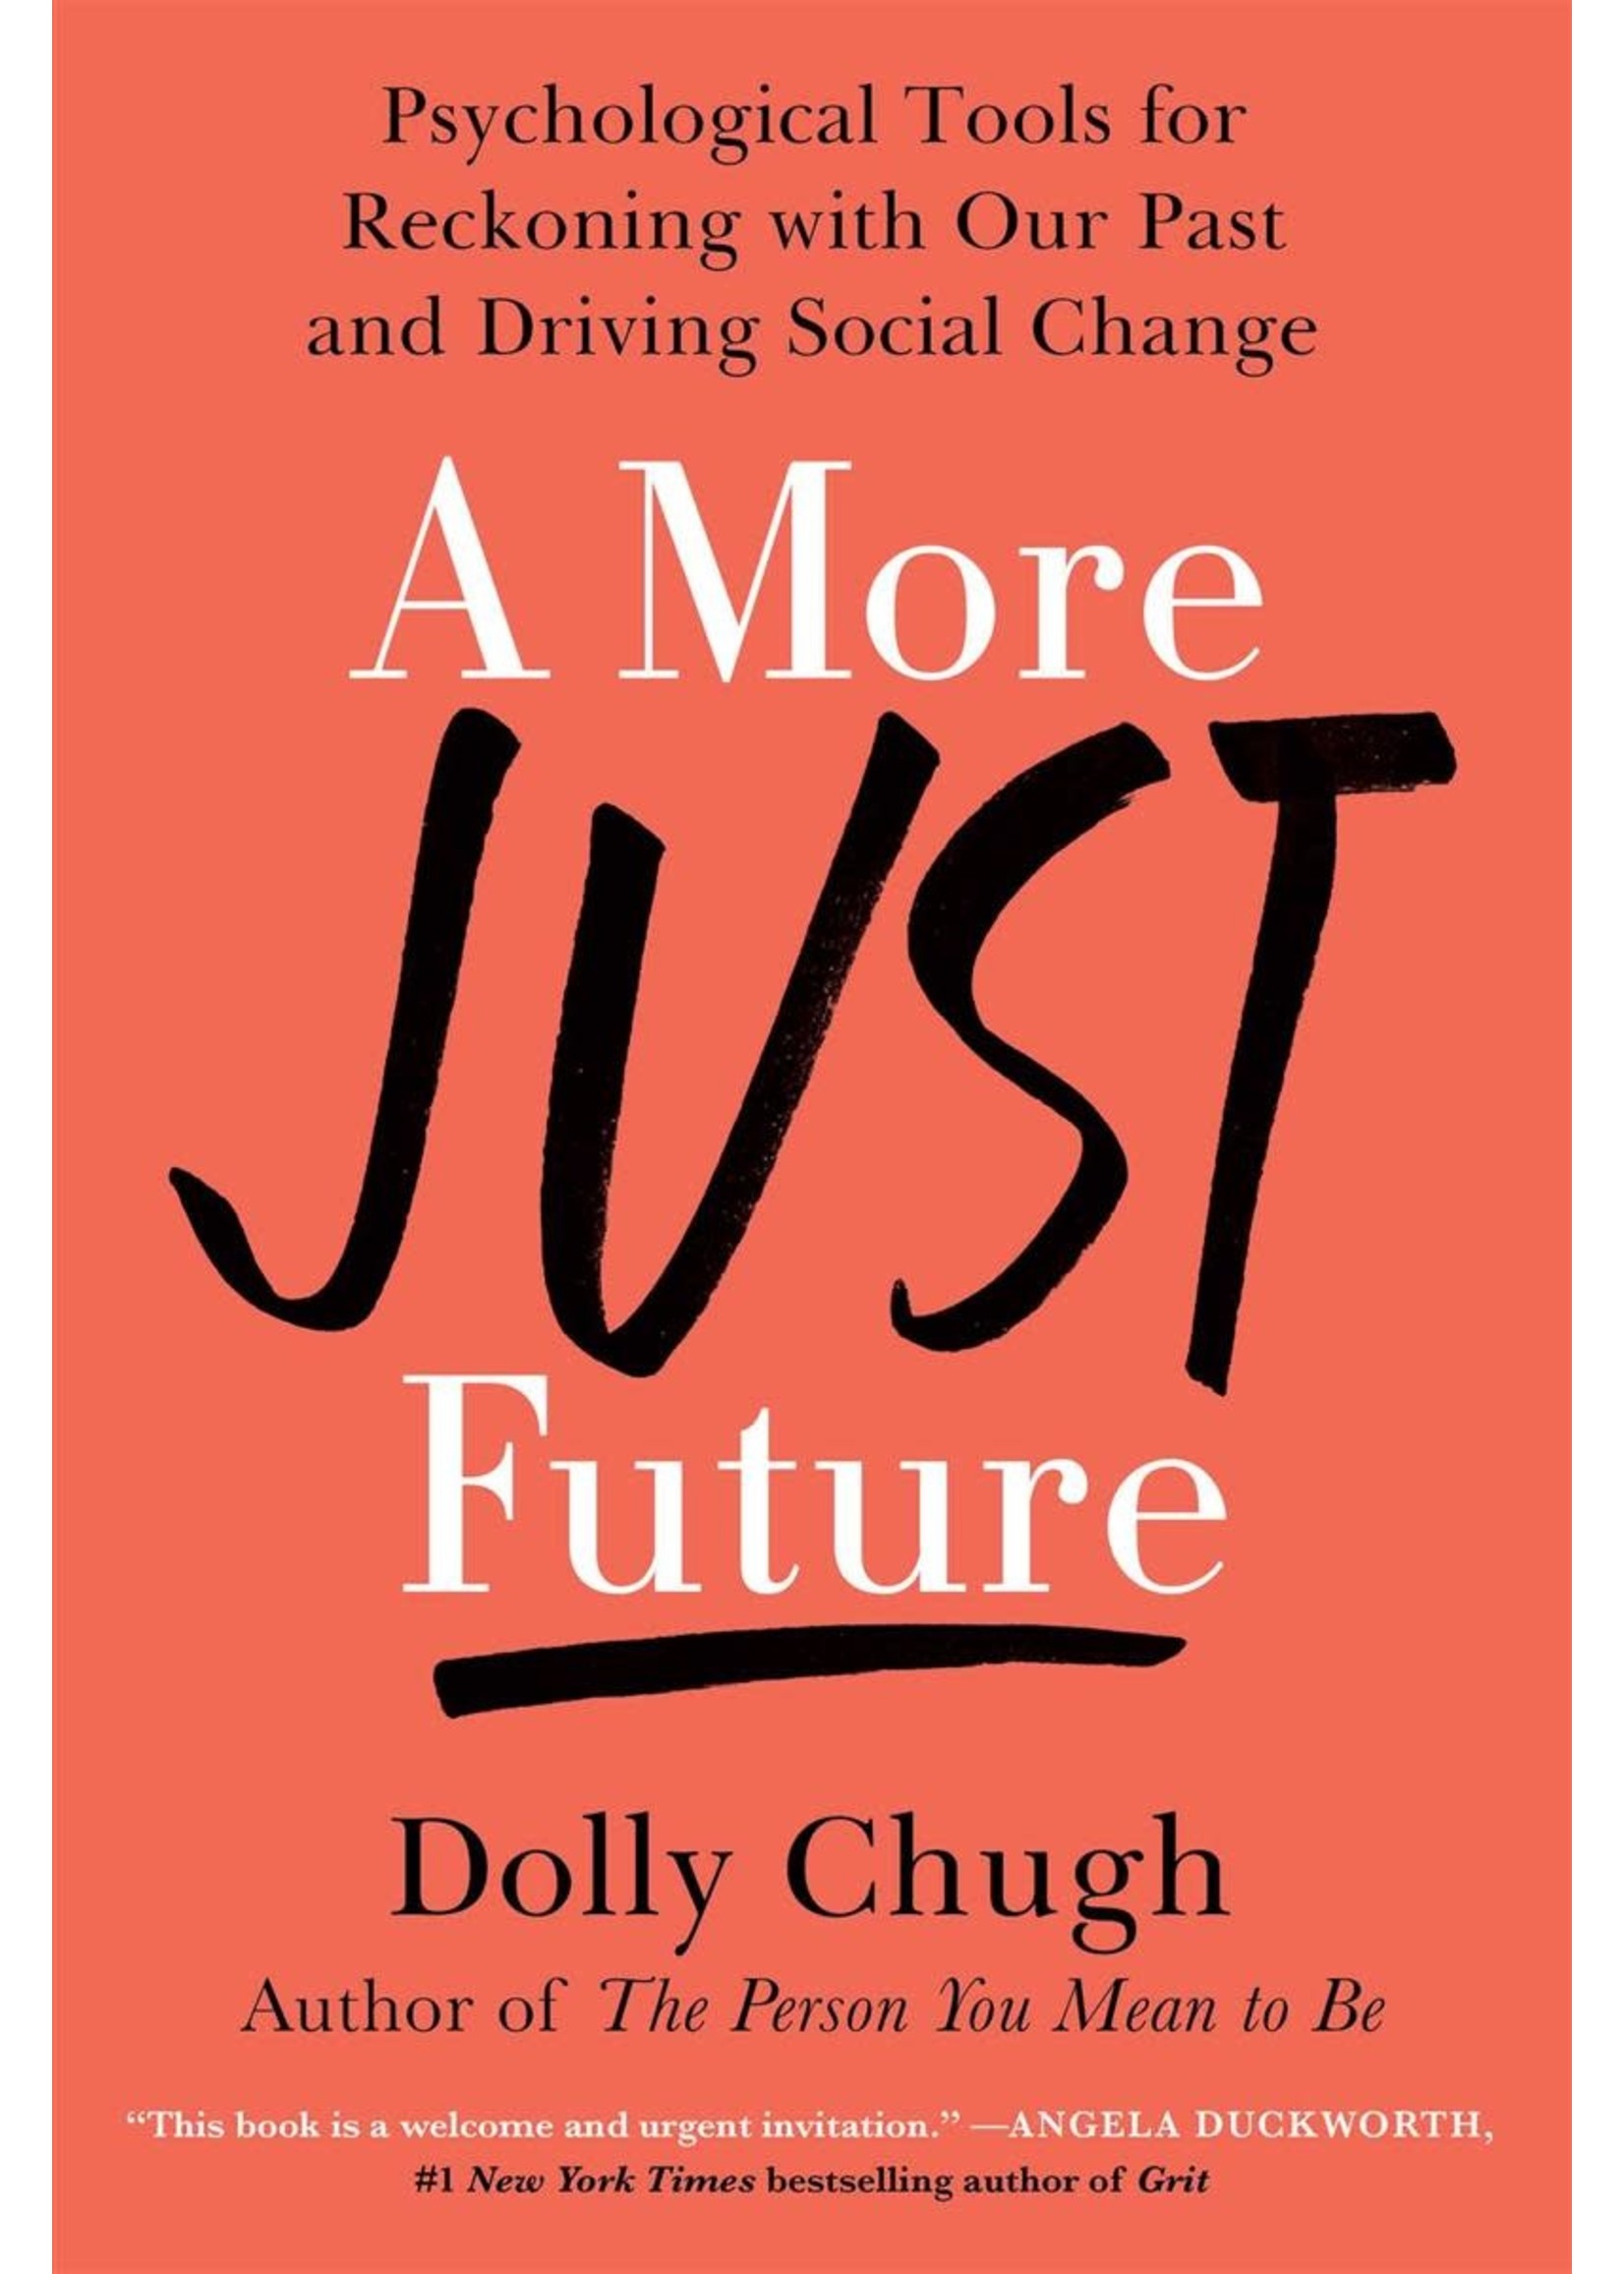 A More Just Future: Psychological Tools for Reckoning with Our Past and Driving Social Change by Dolly Chugh